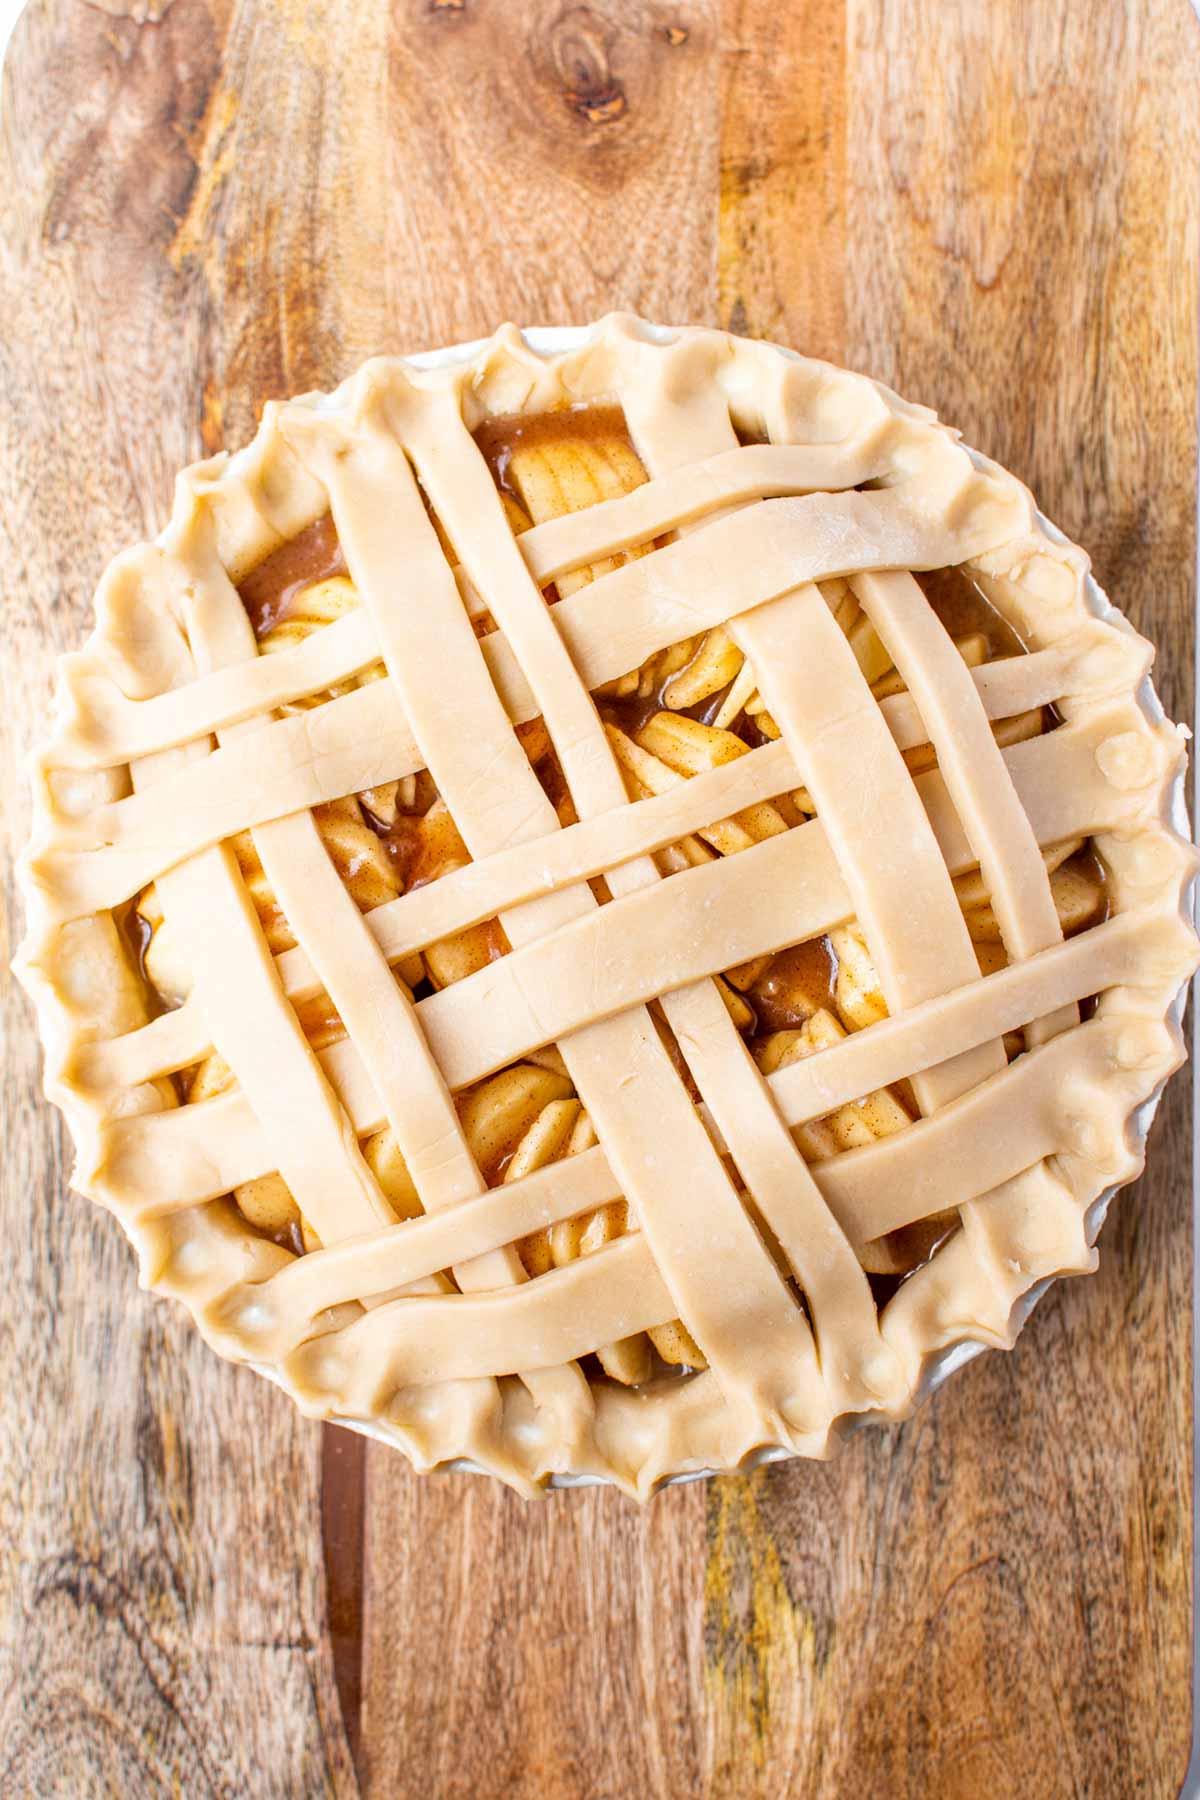 Homemade apple pie topped with strips of pie crust